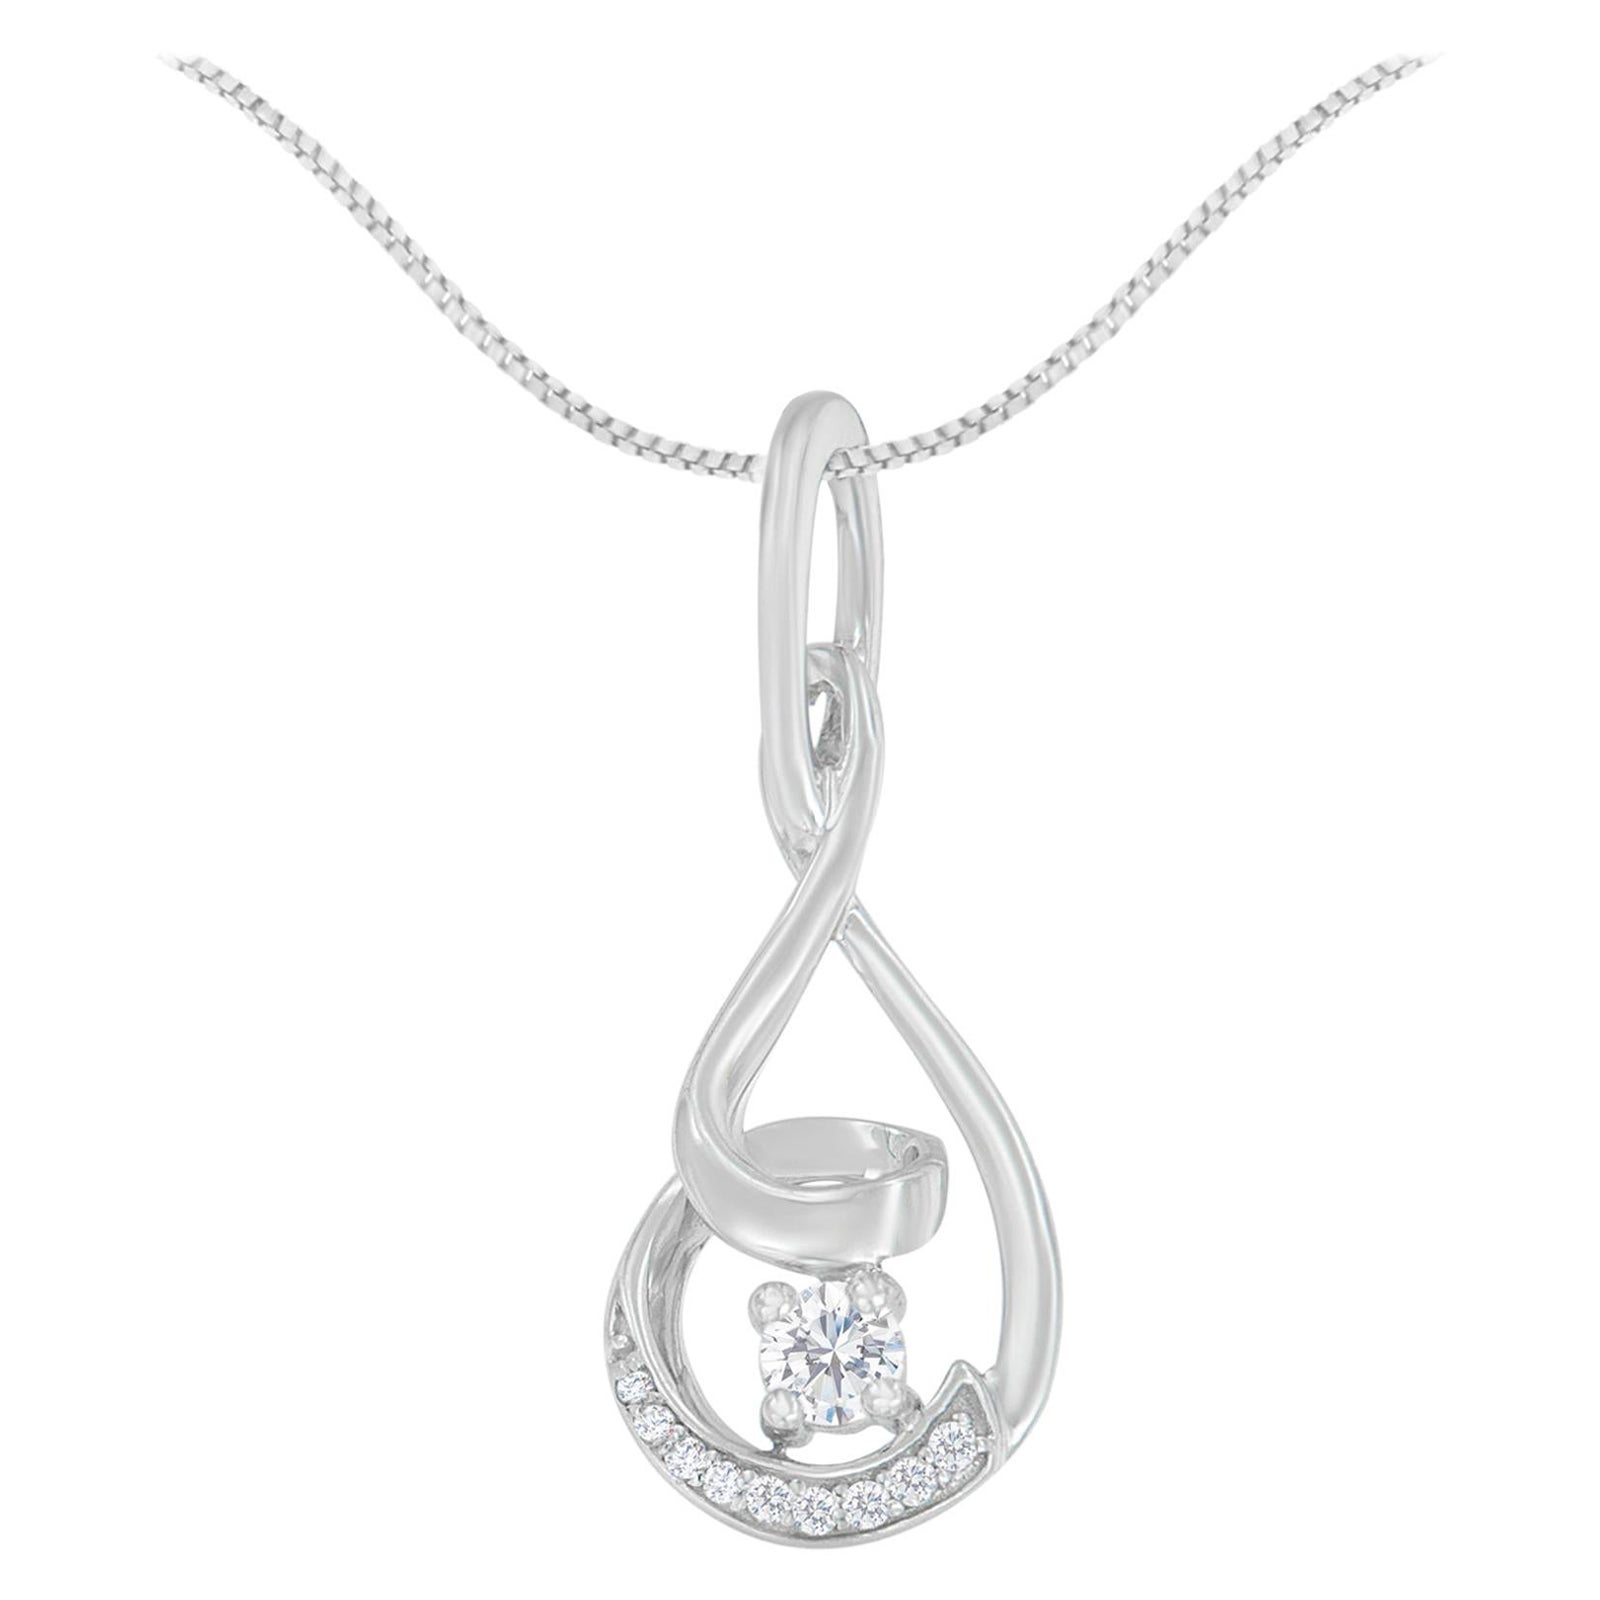 10K White Gold 1/4 Carat Round Cut Diamond Spiral Link Pendant Necklace For Sale